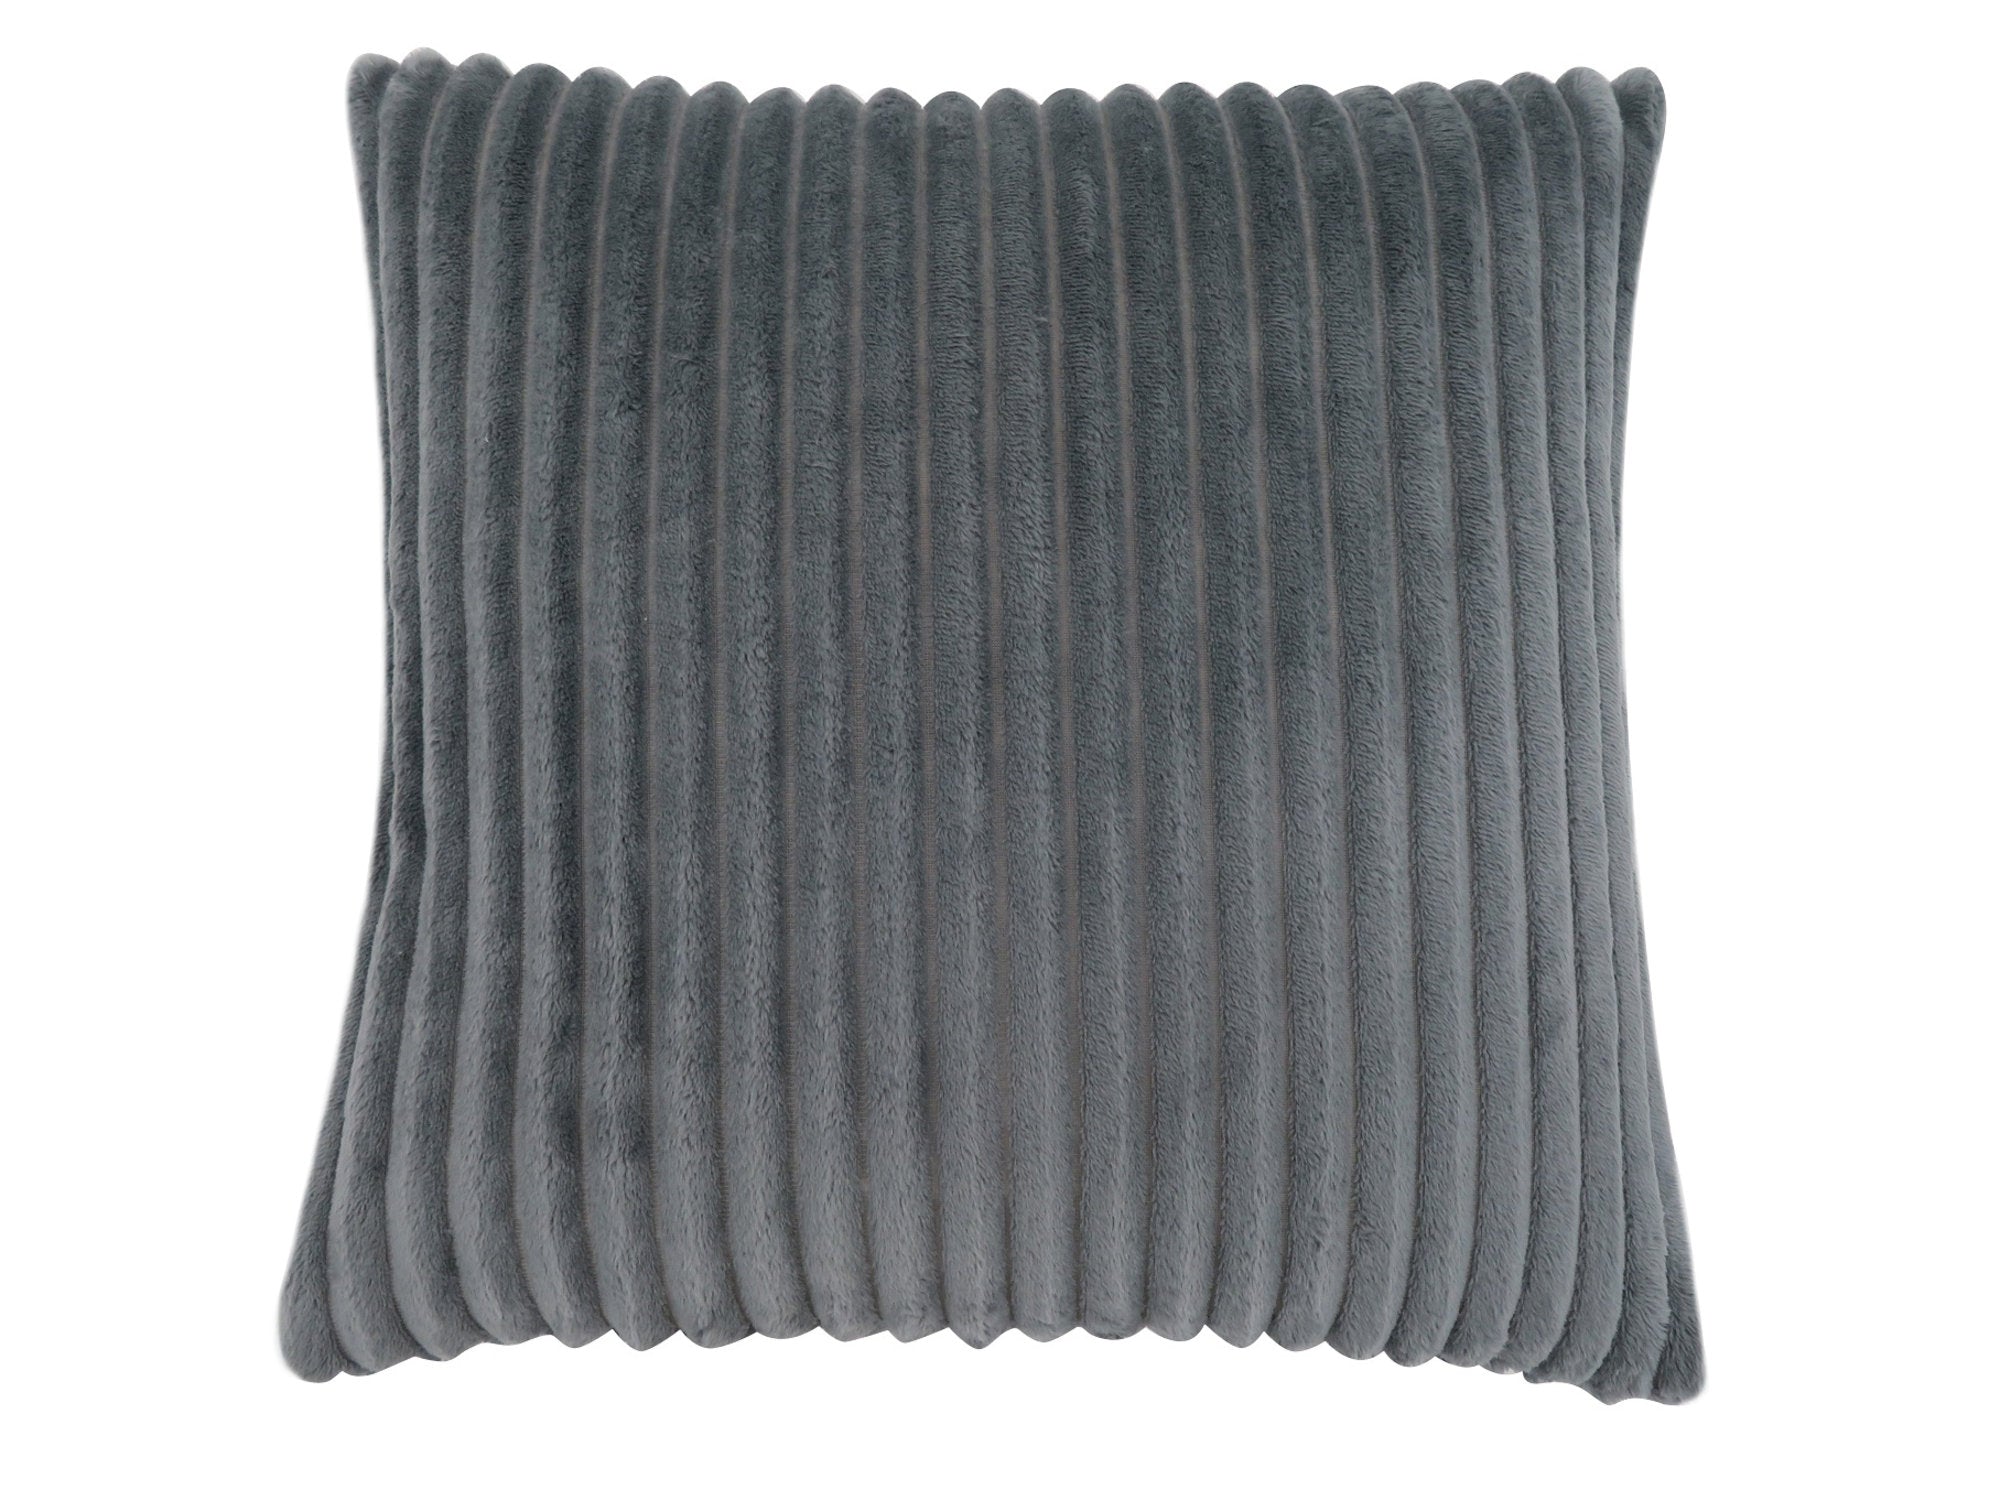 PILLOW - 18"X 18" / GREY ULTRA SOFT RIBBED STYLE / 1PC